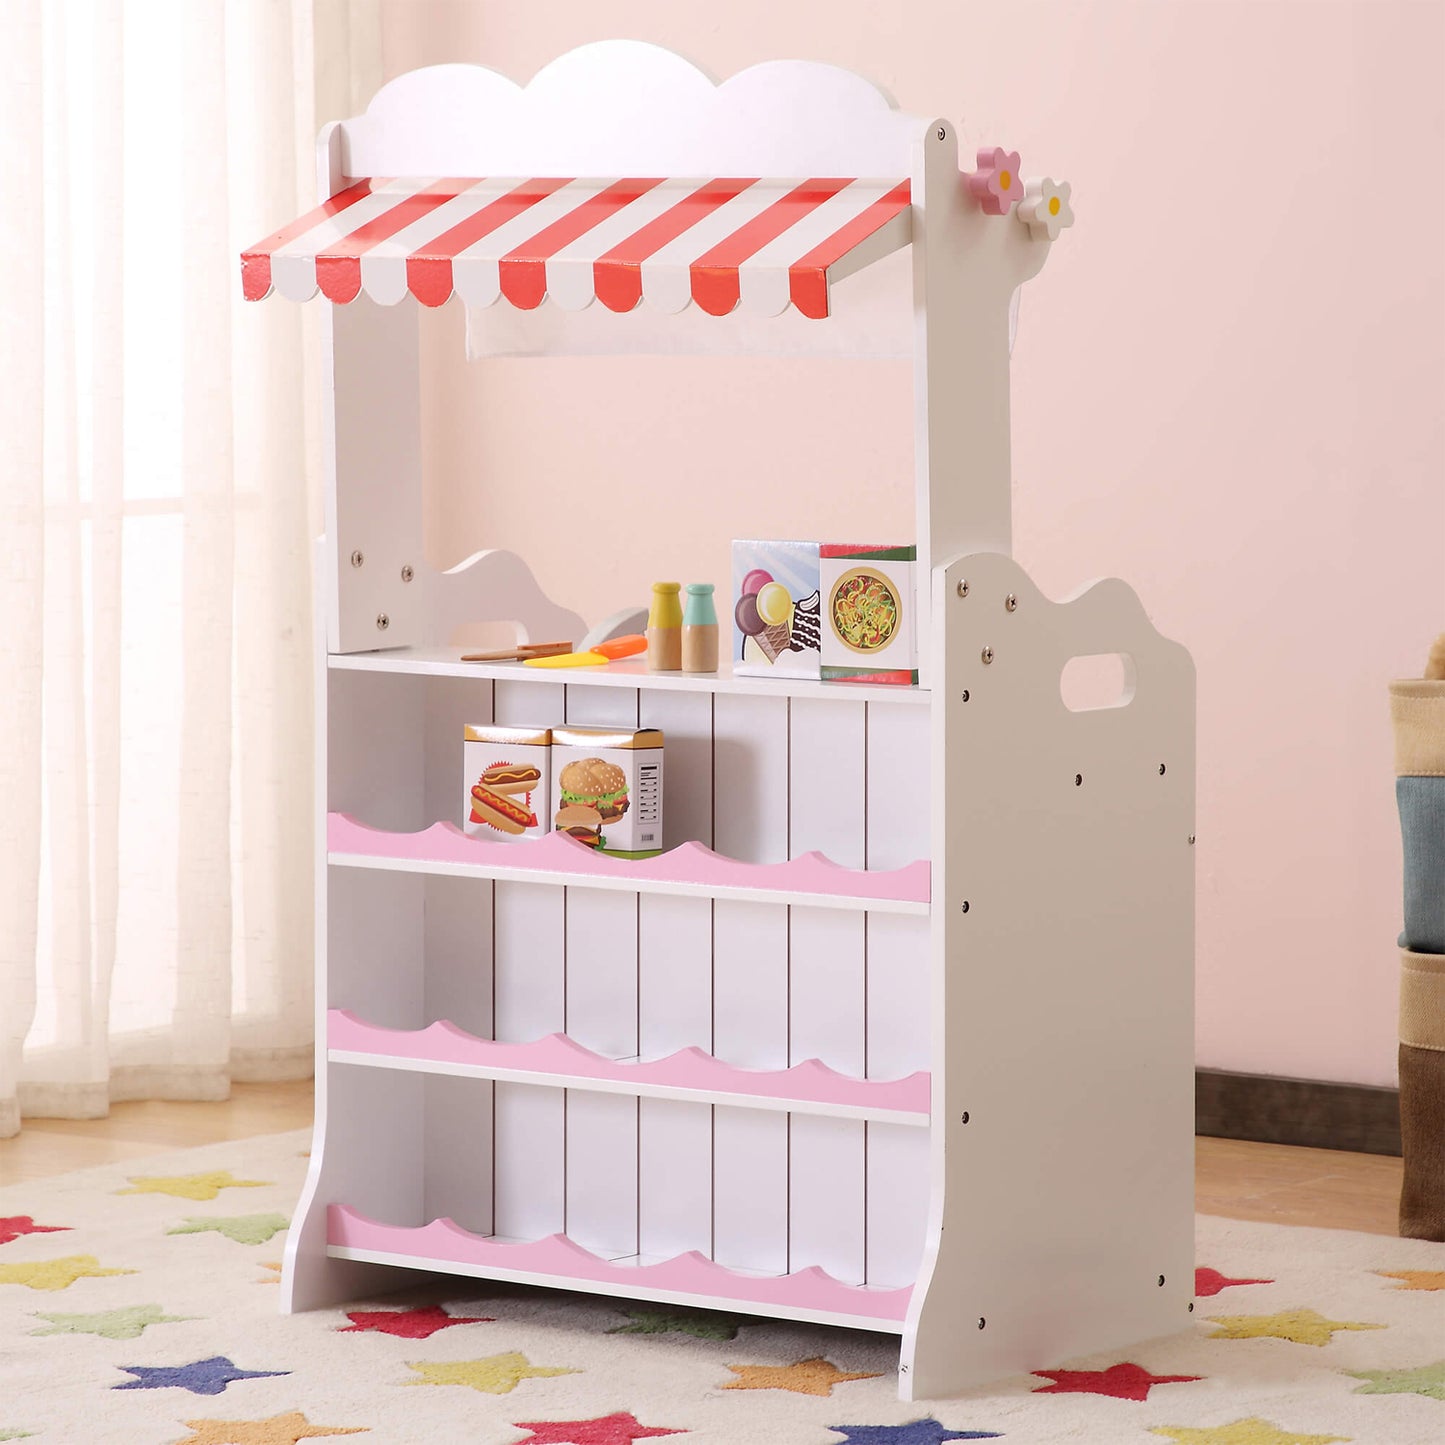 Toy Kitchen Market Stall with 37 Accessories by Liberty House Toys